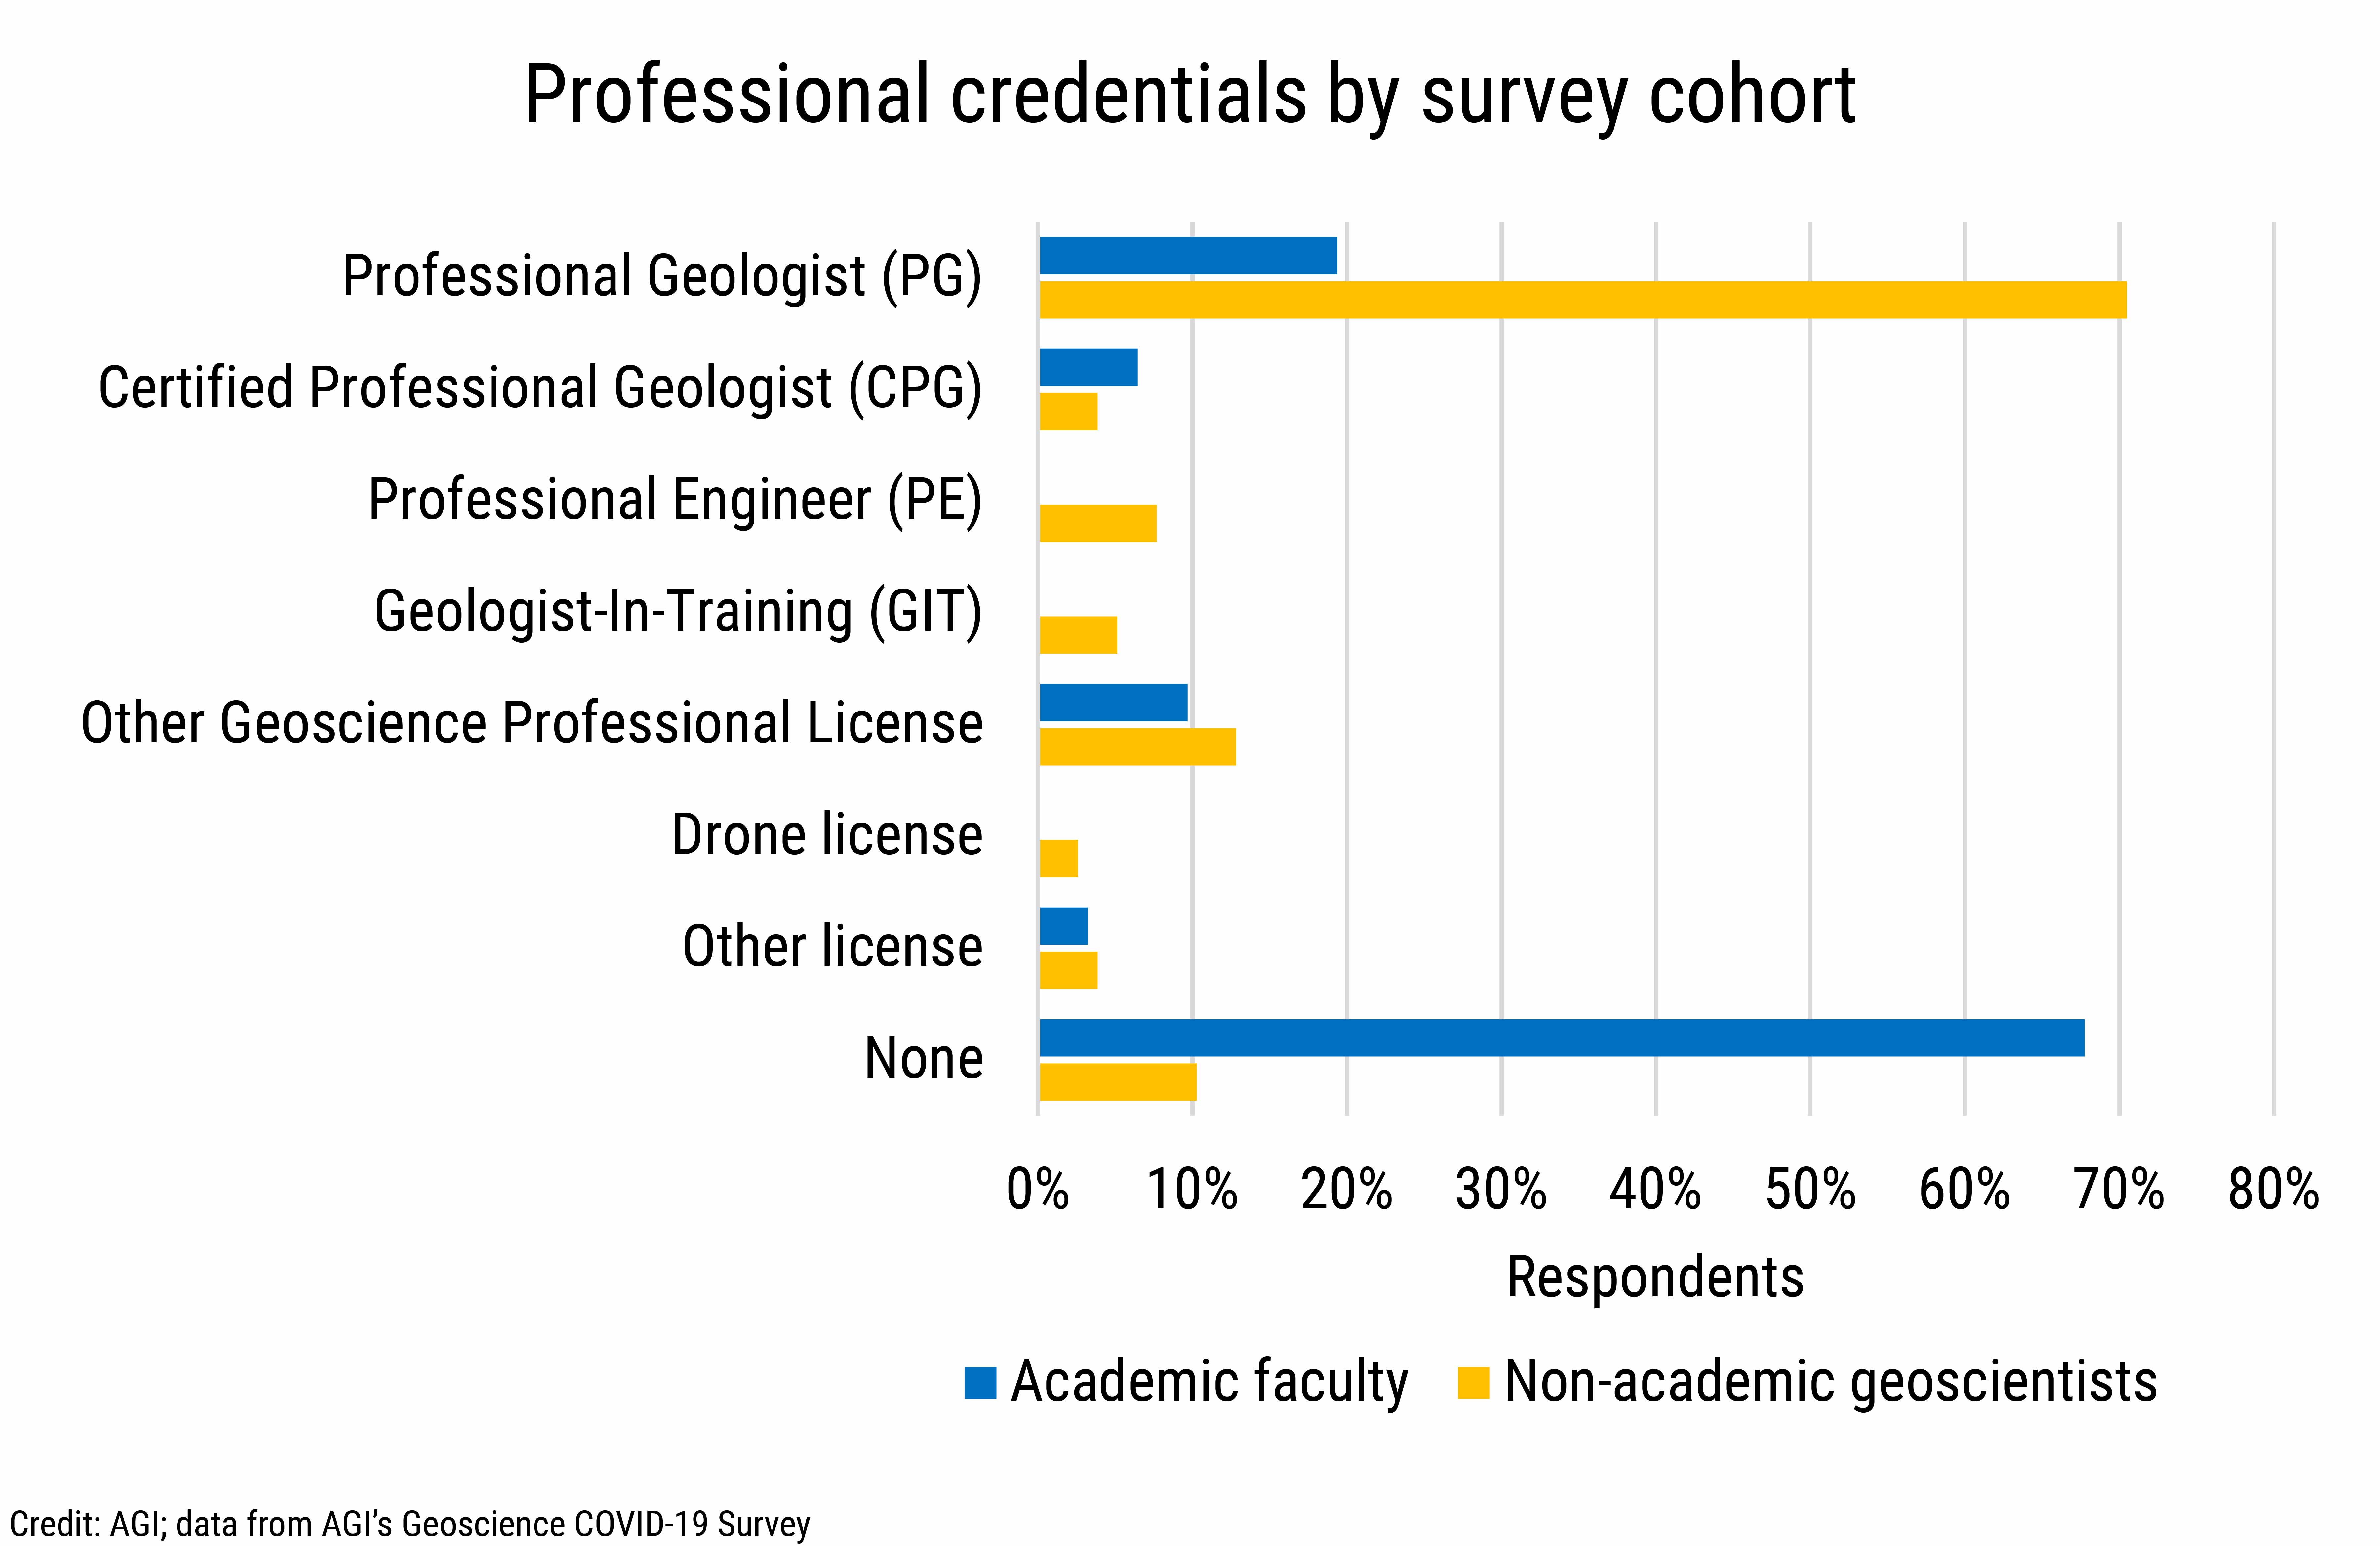 DB_2021-025 chart 01: Professional credentials by survey cohort (Credit: AGI; data from AGI&#039;s Geoscience COVID-19 Survey)